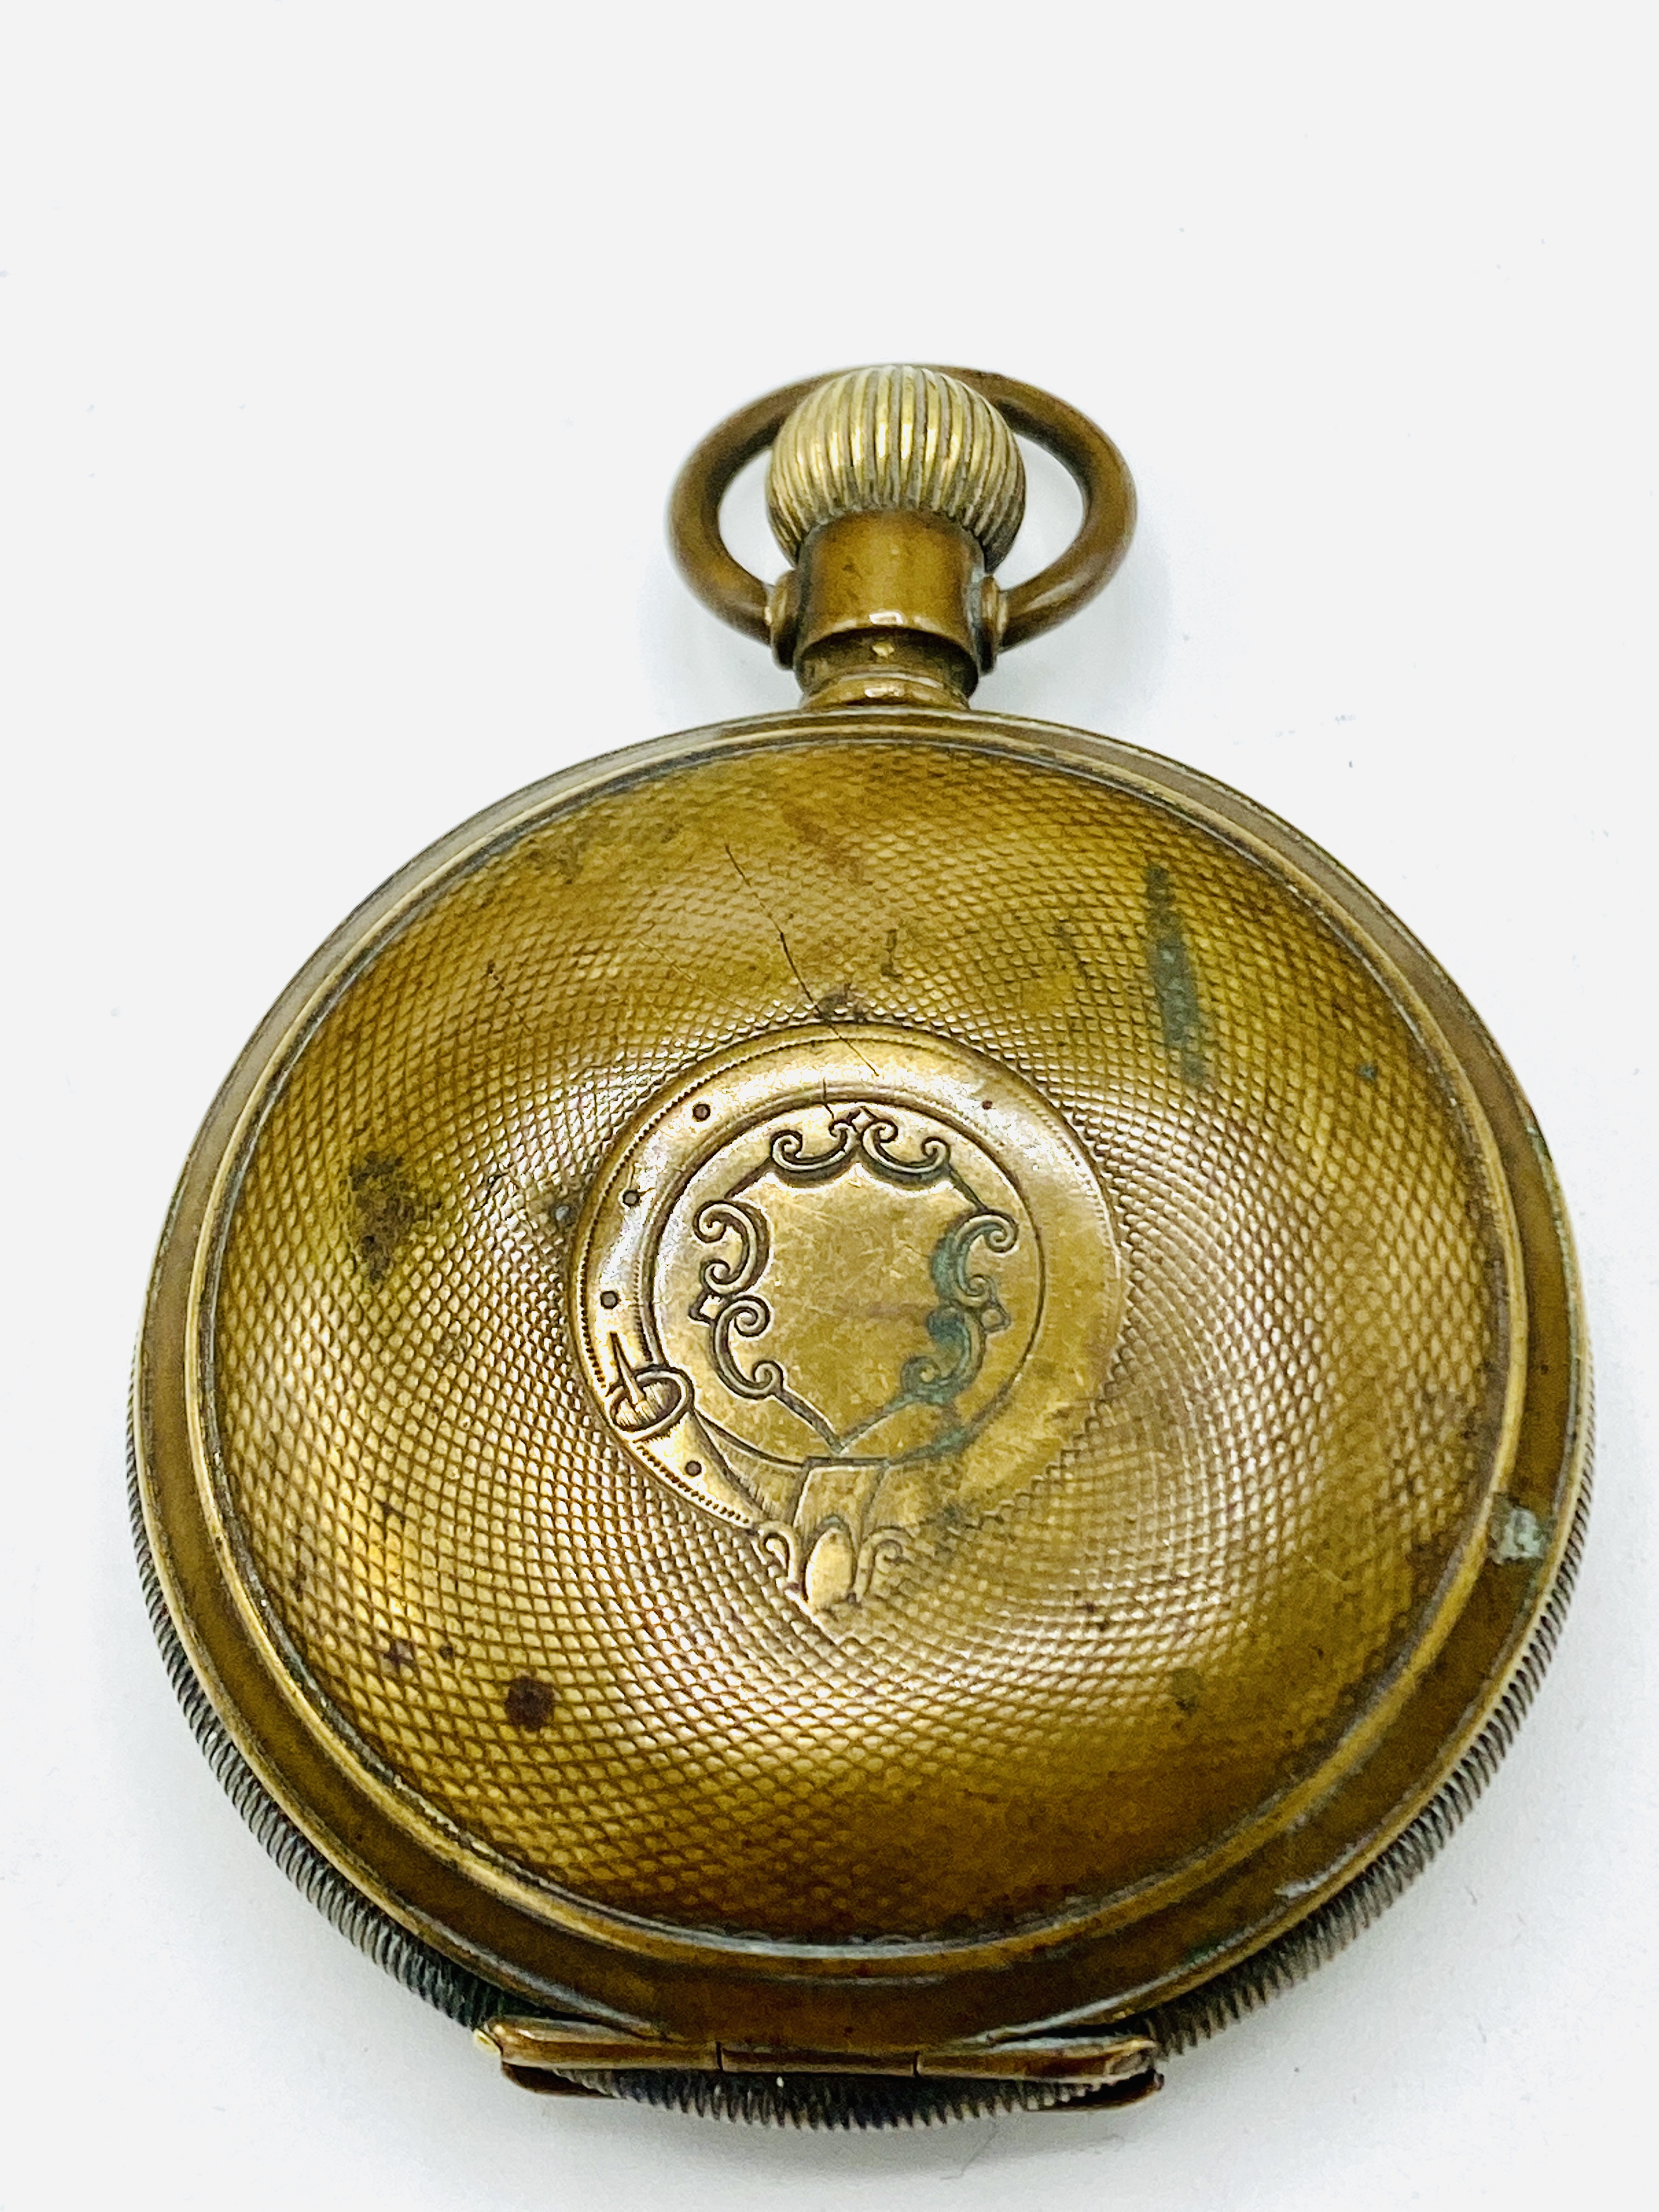 Collection of pocket watches, including gold and silver cased - Image 16 of 24